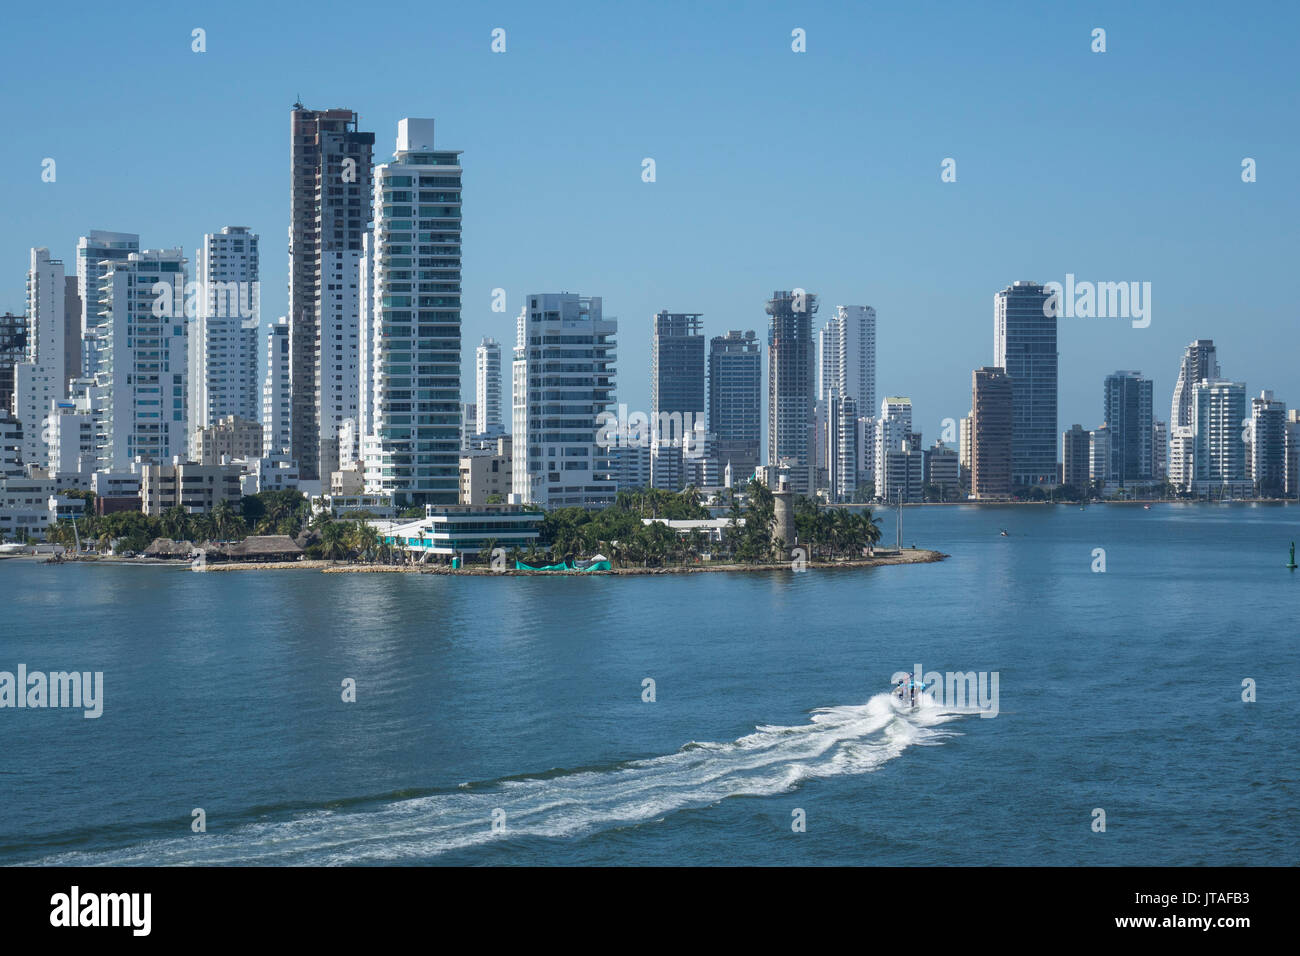 Bocagrande skyline and harbour, Cartagena, Colombia Stock Photo